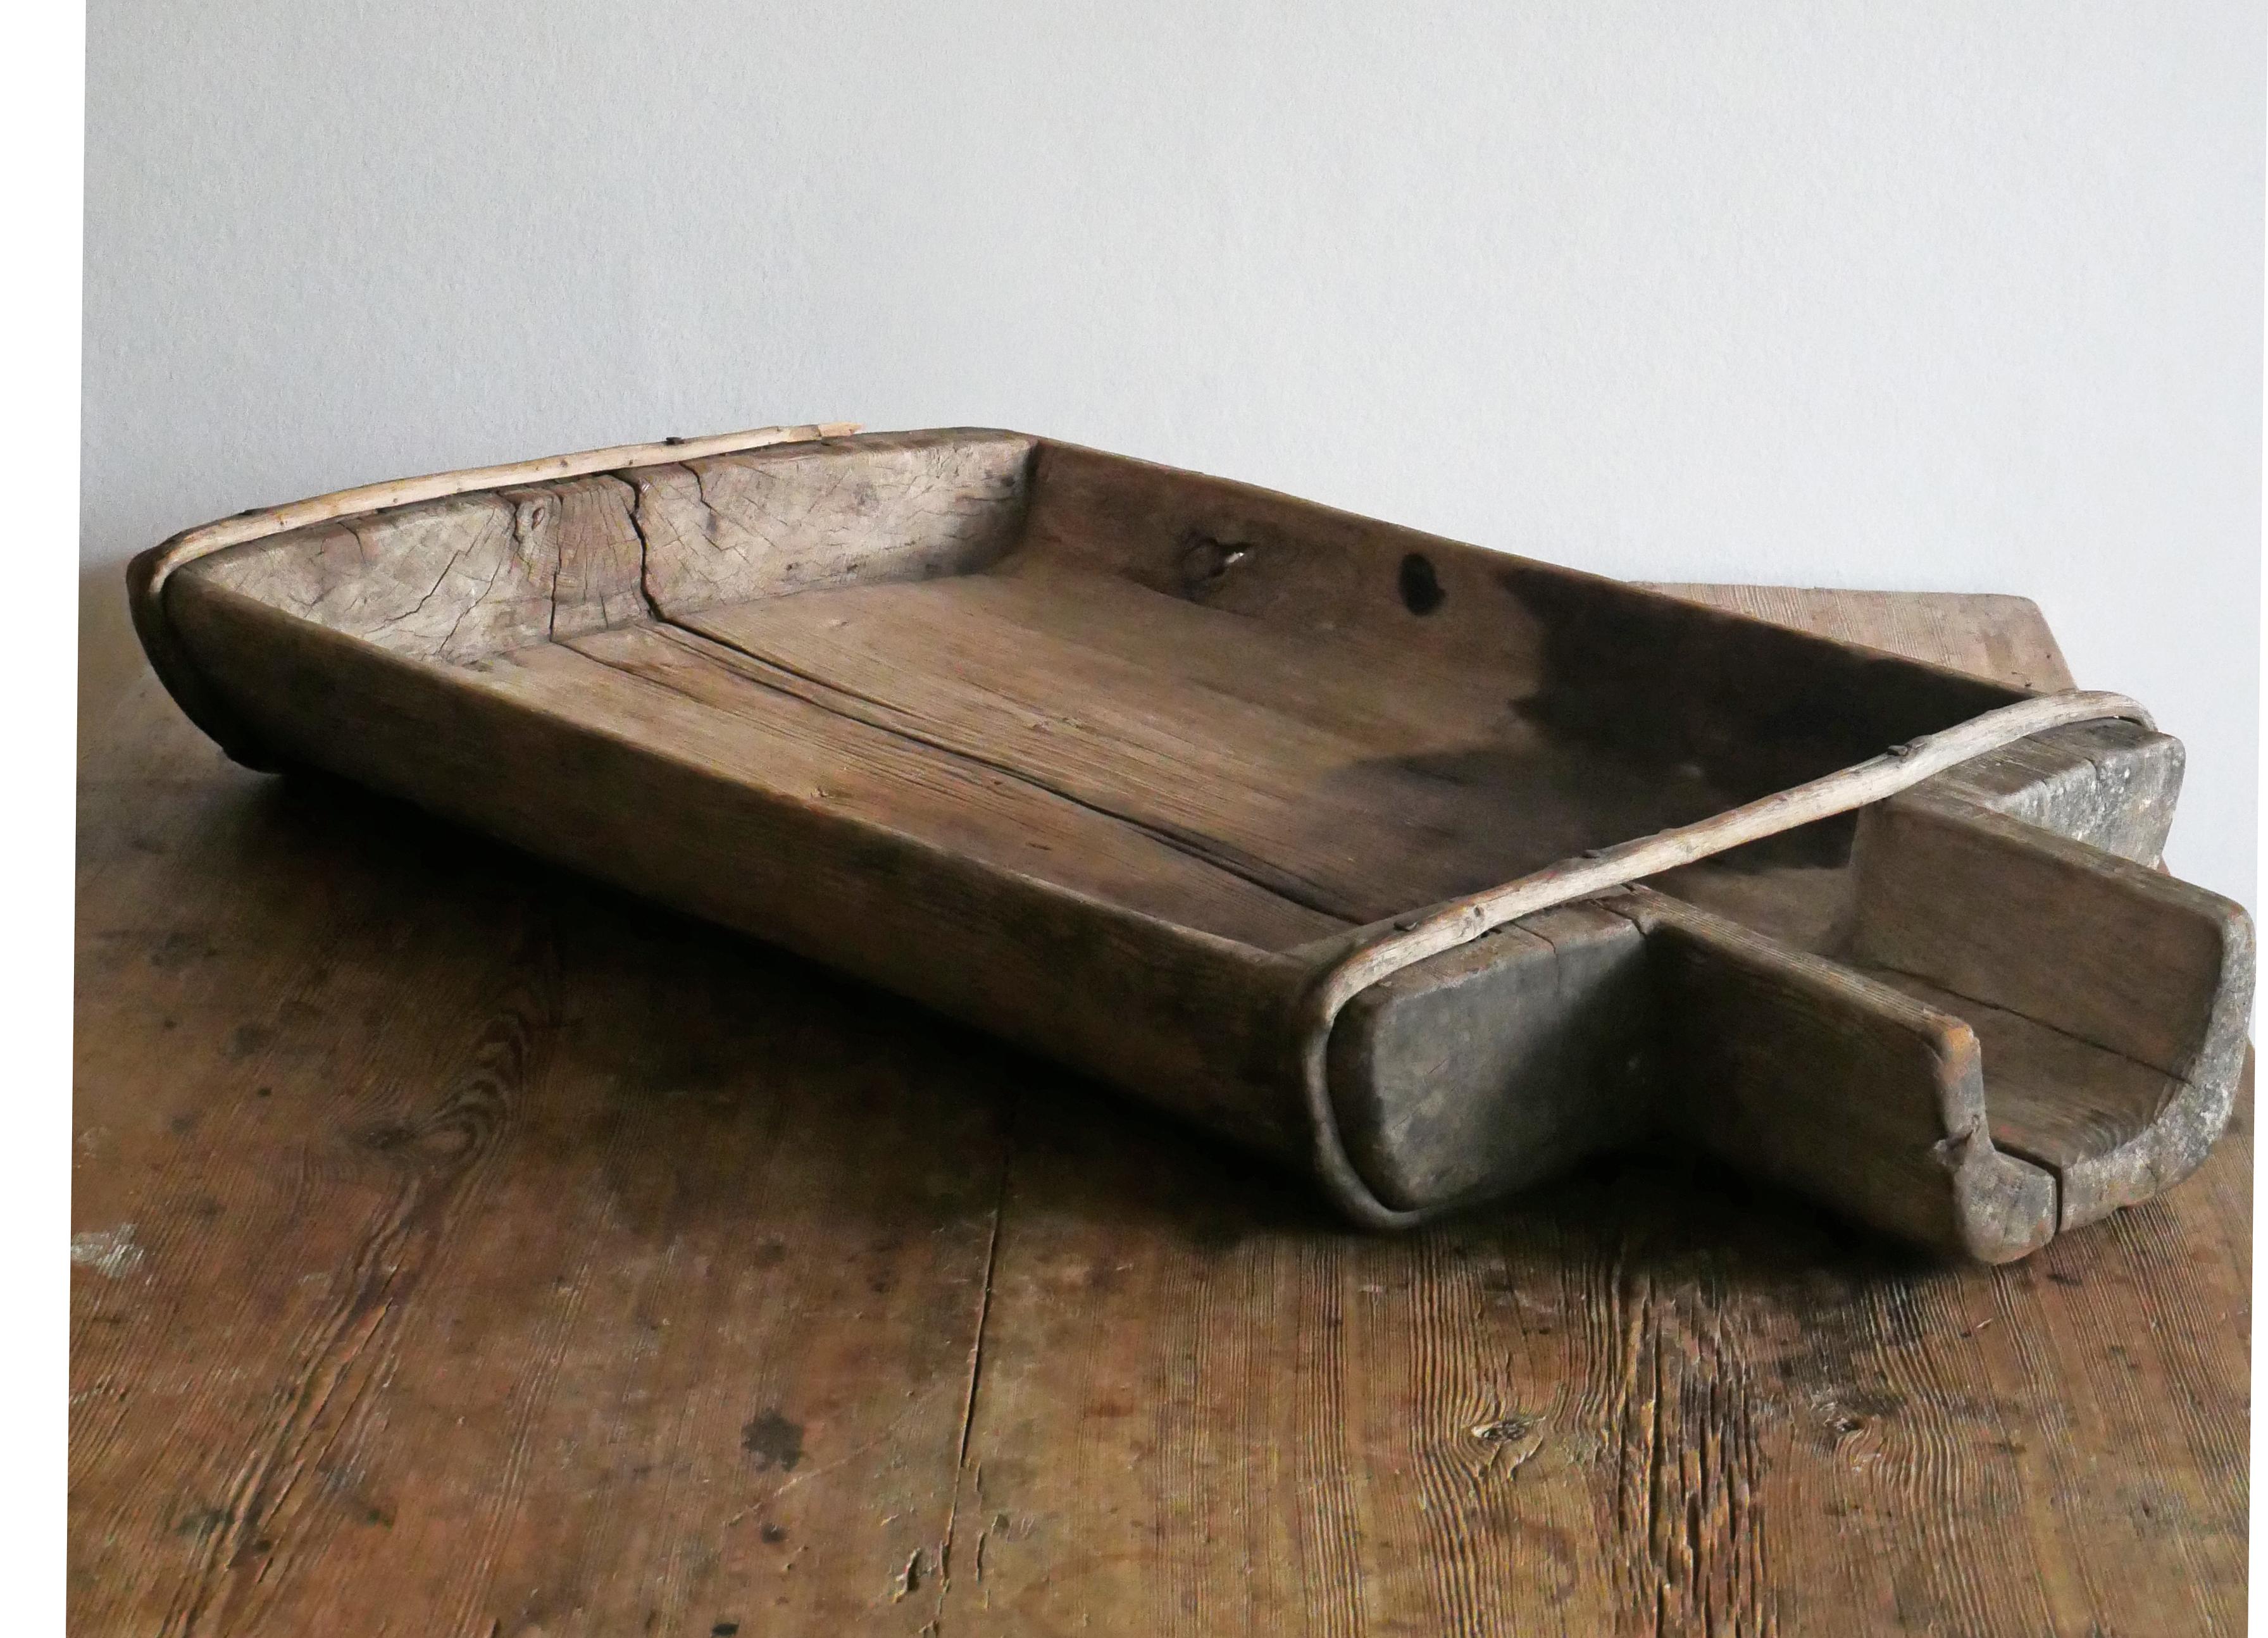 Swedish Ostränna from 1744.

Big trough used in cheese production.

Made in pine wood 1744, with owner marks and date. 
Beautiful piece with old repairs and smooth patina.

Height: 9 cm /3.5 inch
Widht: 81 cm /31.8 inch
Depth: 45 cm /17.7 inch